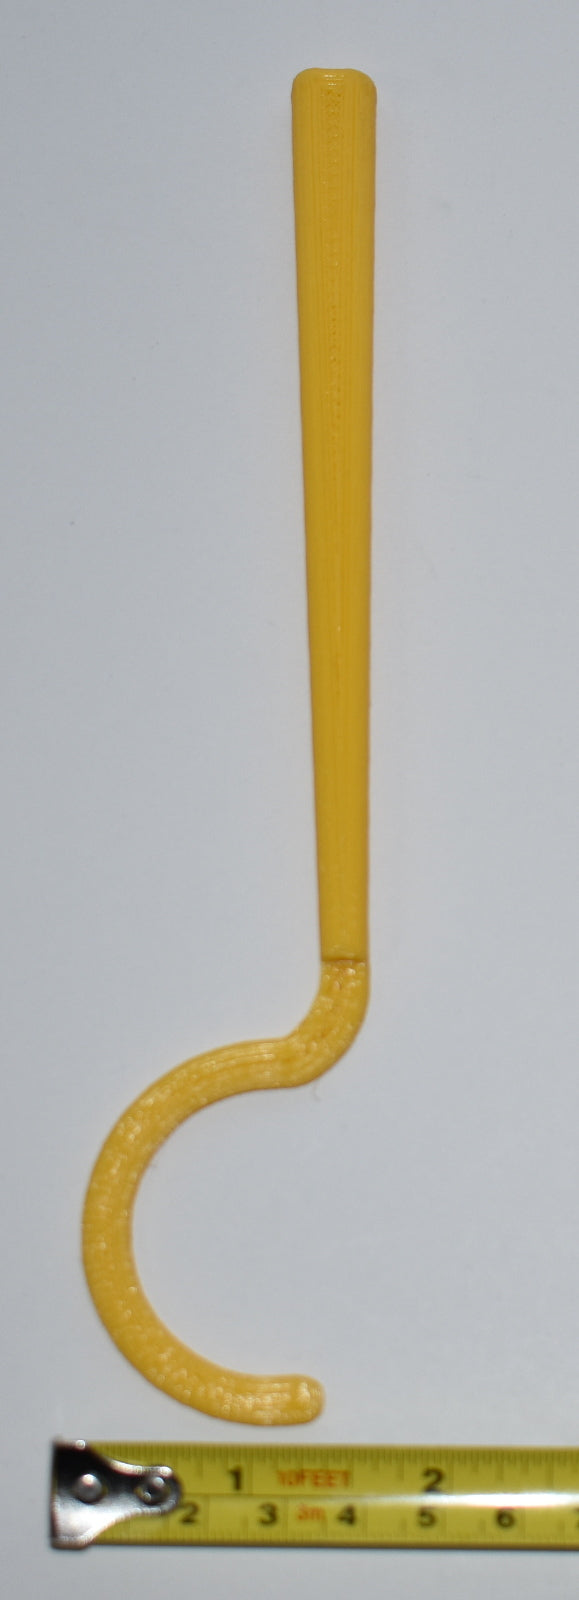 Yellow Oreo Cream Filled Cookie Dipper Kitchen Utensil Made in USA PR3299